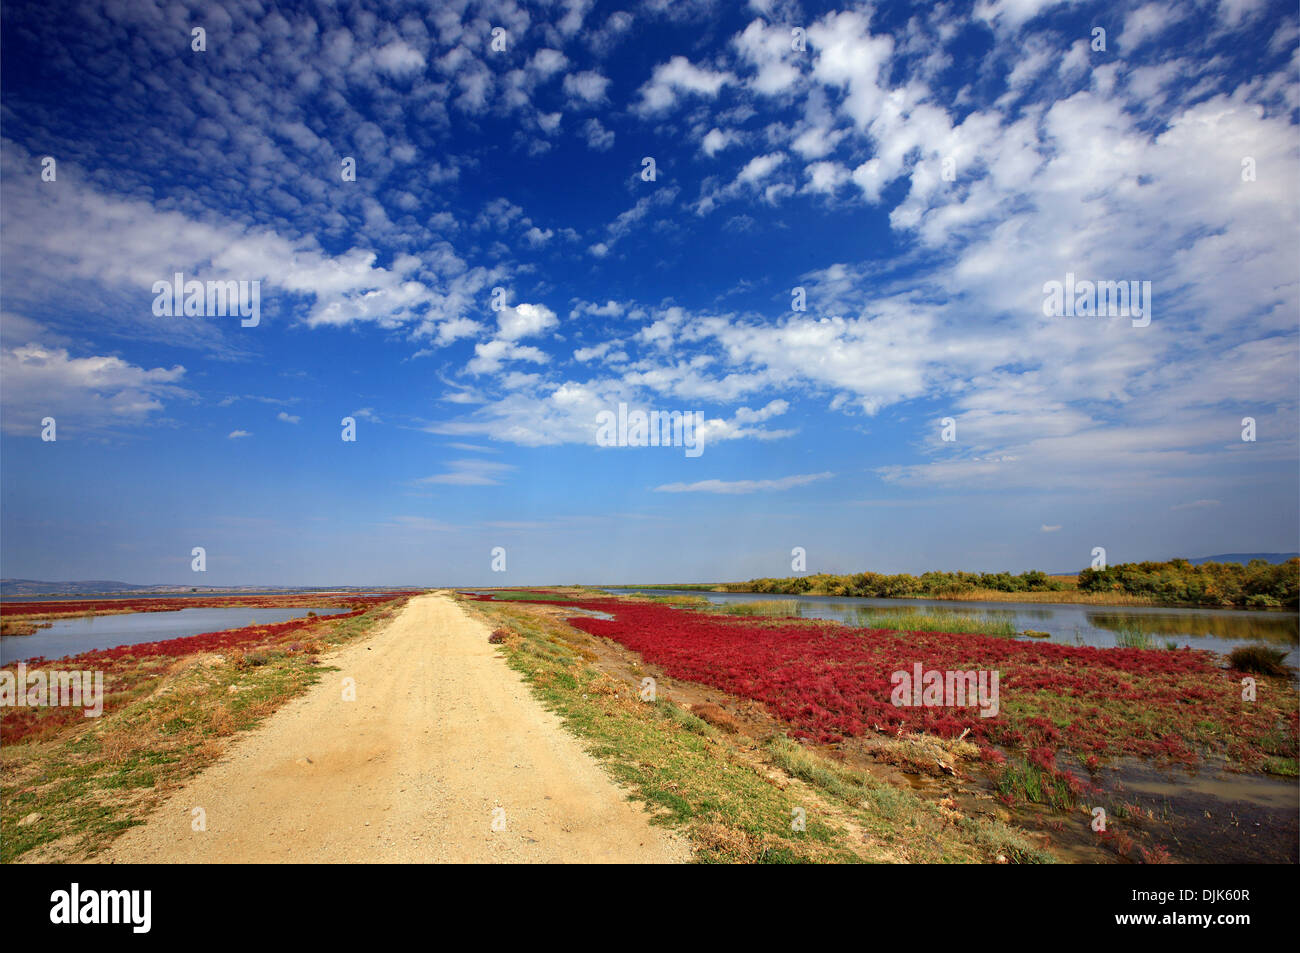 At the Delta of Evros river, Thrace, Greece. Stock Photo